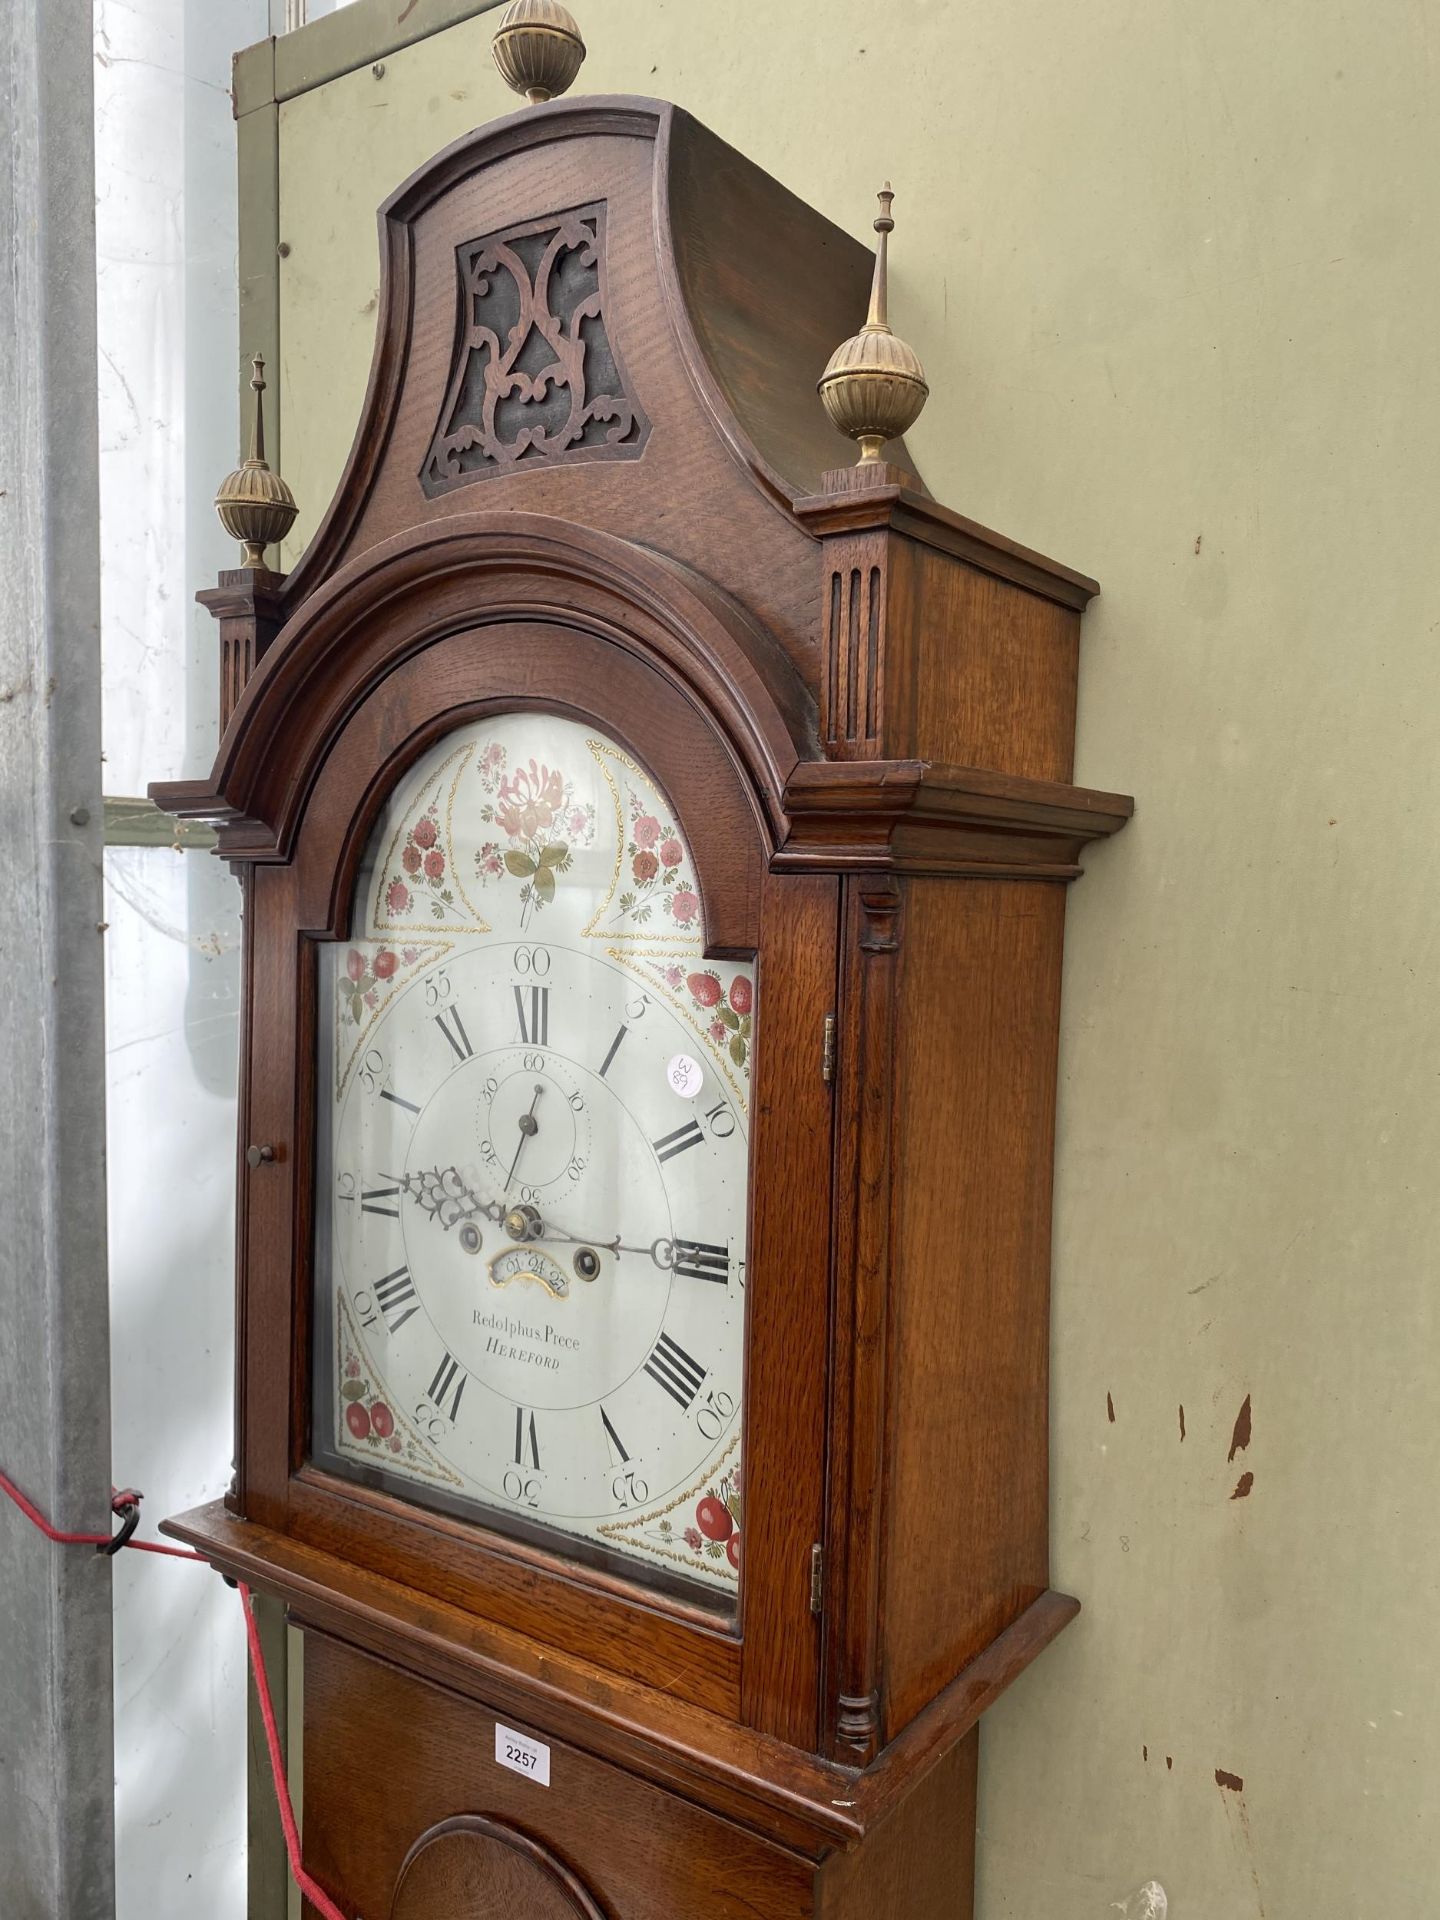 A 19TH CENTURY OAK EIGHT-DAY LONGCASE CLOCK WITH PAINTED ENAMEL FACE BY REDOLPHUS PRECE, HEREFORD - Image 3 of 6